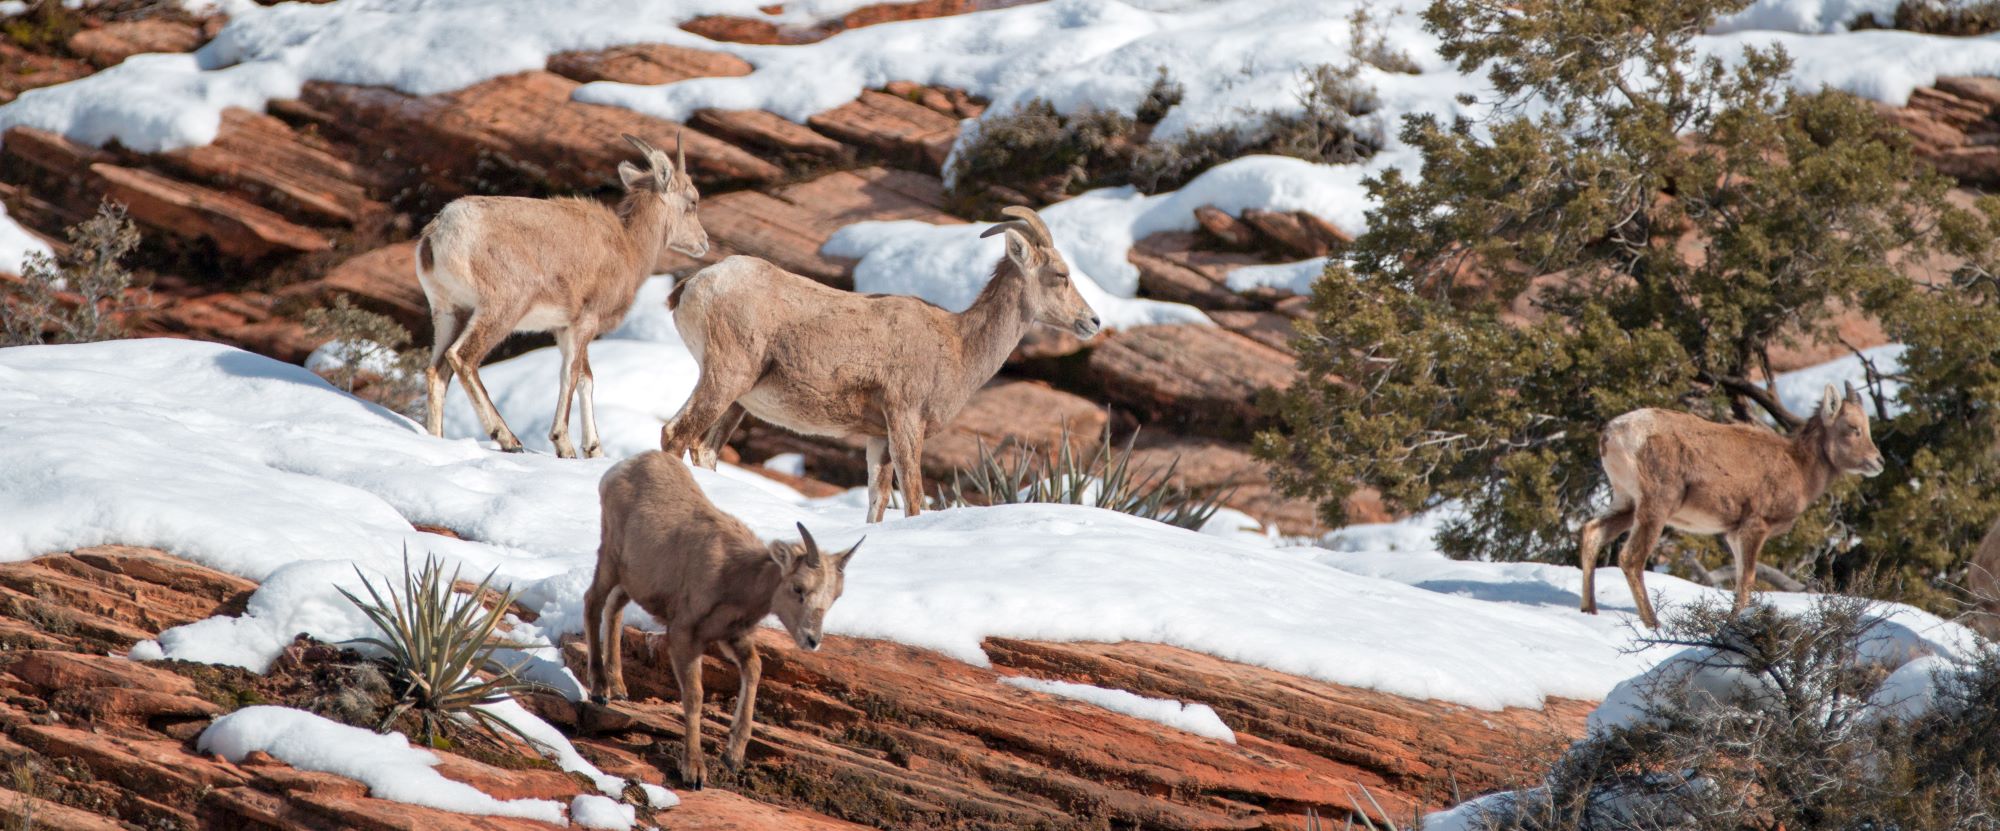 A group of desert bighorn sheep in Zion National Park.